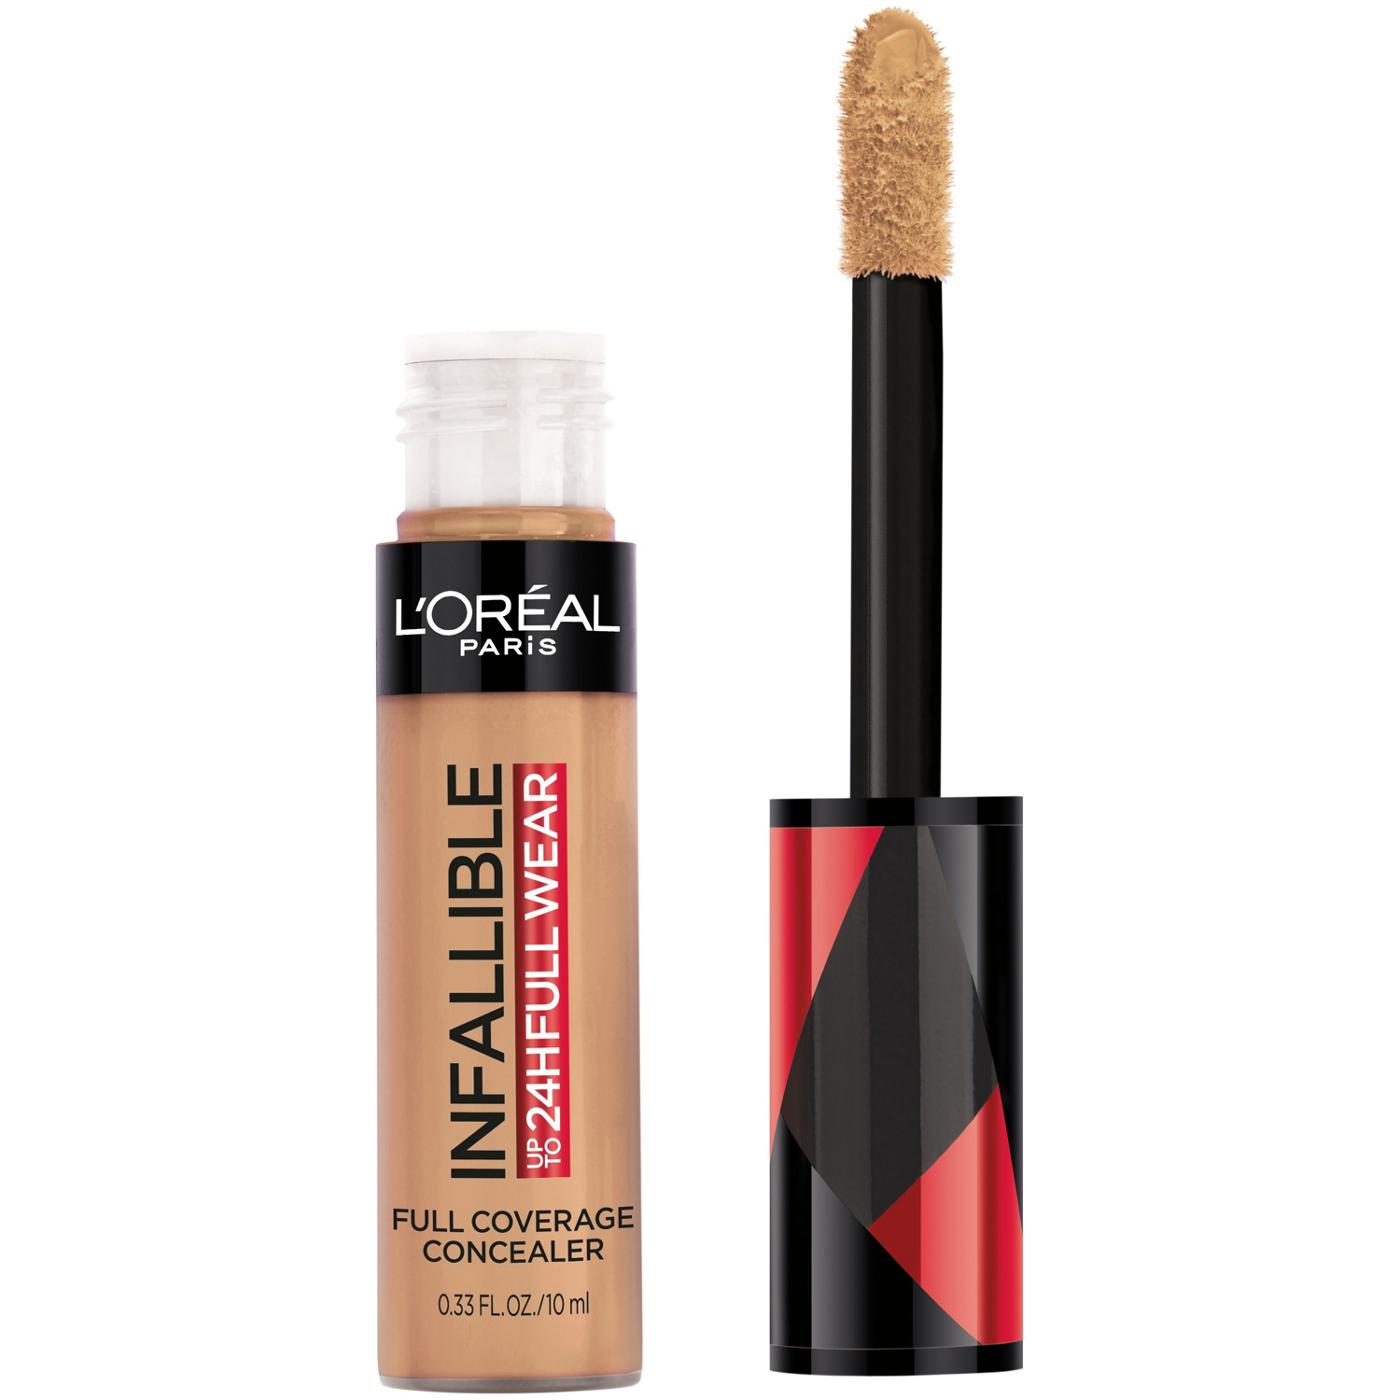 L'Oréal Paris Infallible Full Wear Concealer up to 24H Full Coverage Toffee; image 1 of 8